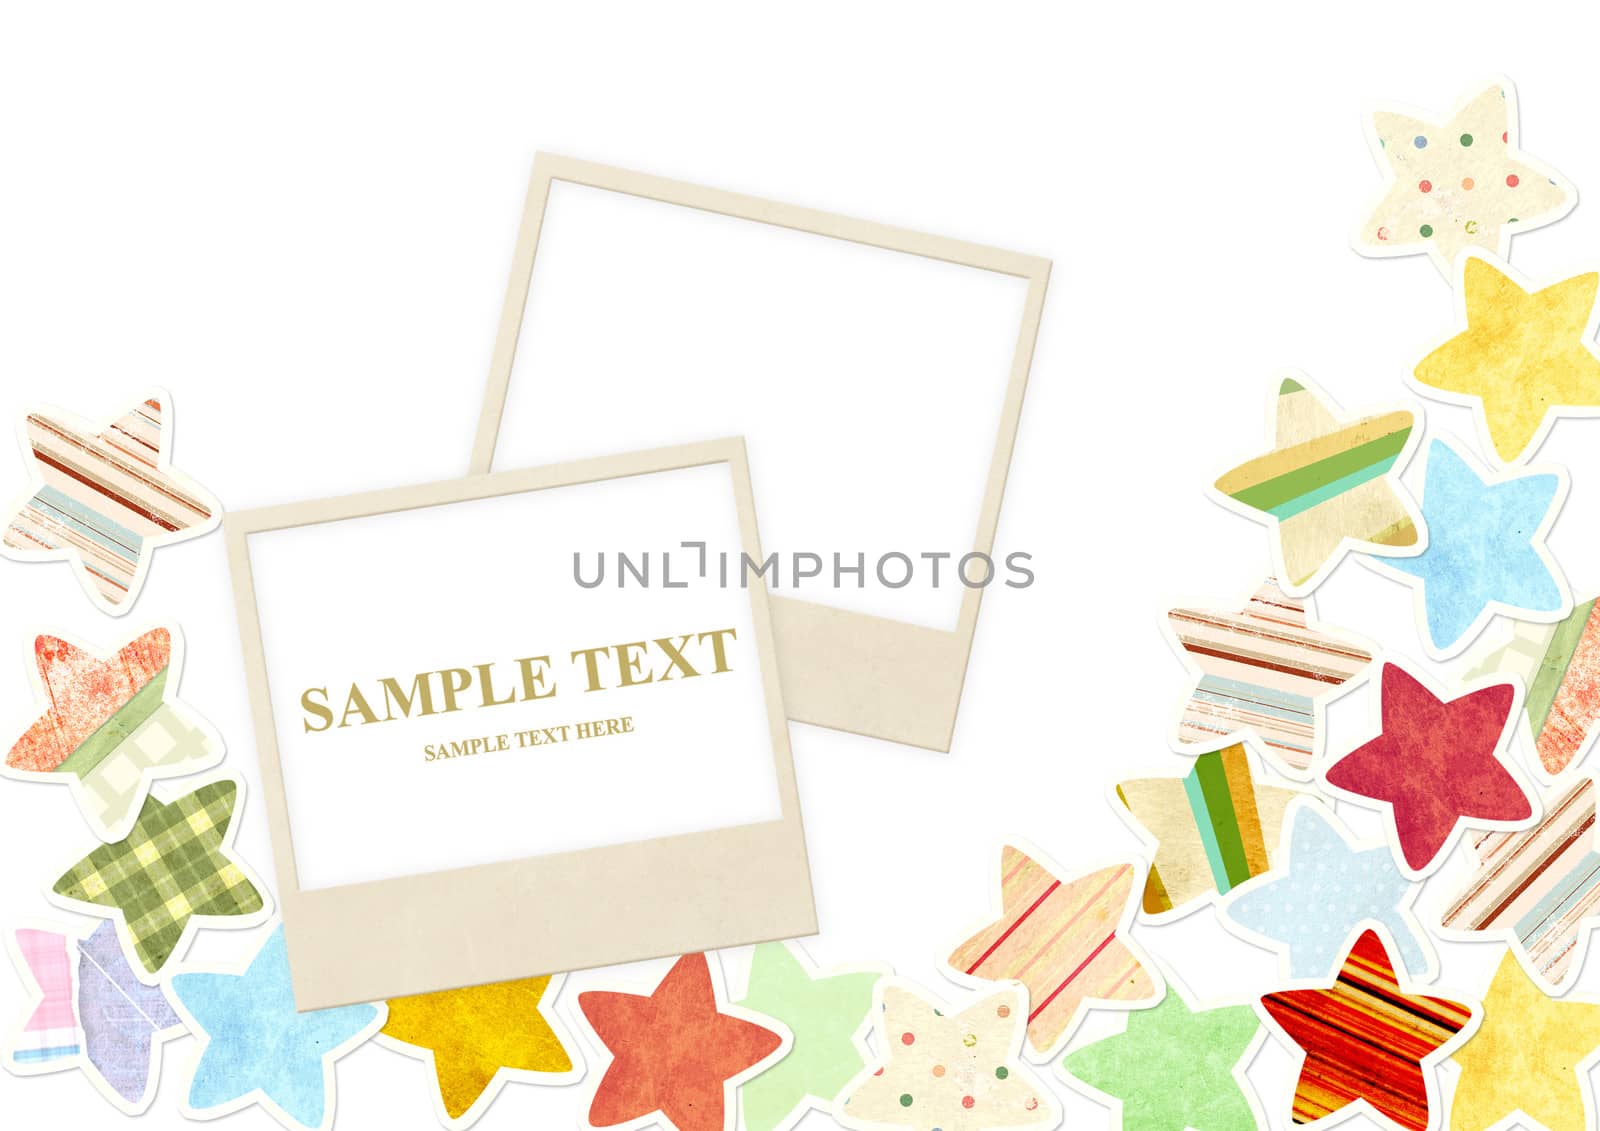 Background with photo and paper stars by frenta